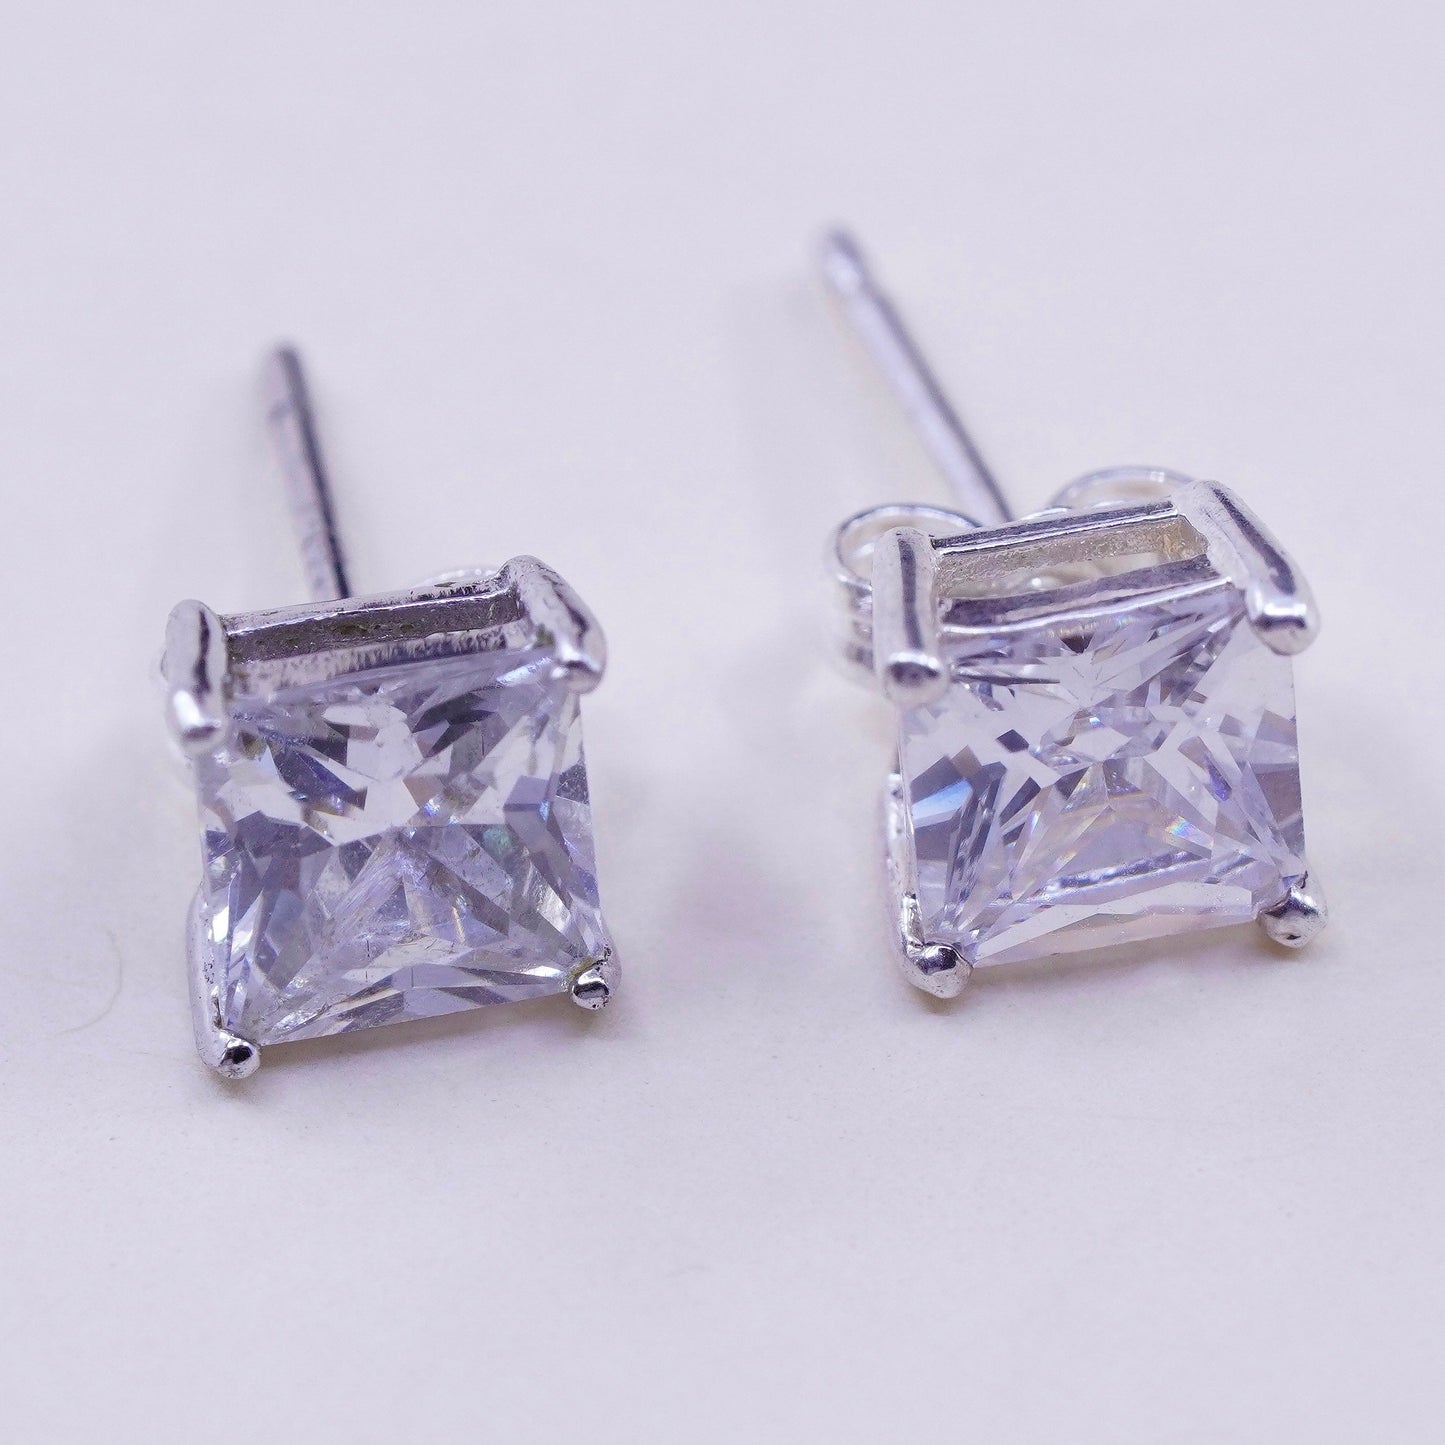 Vintage sterling 925 silver square cz studs, earrings